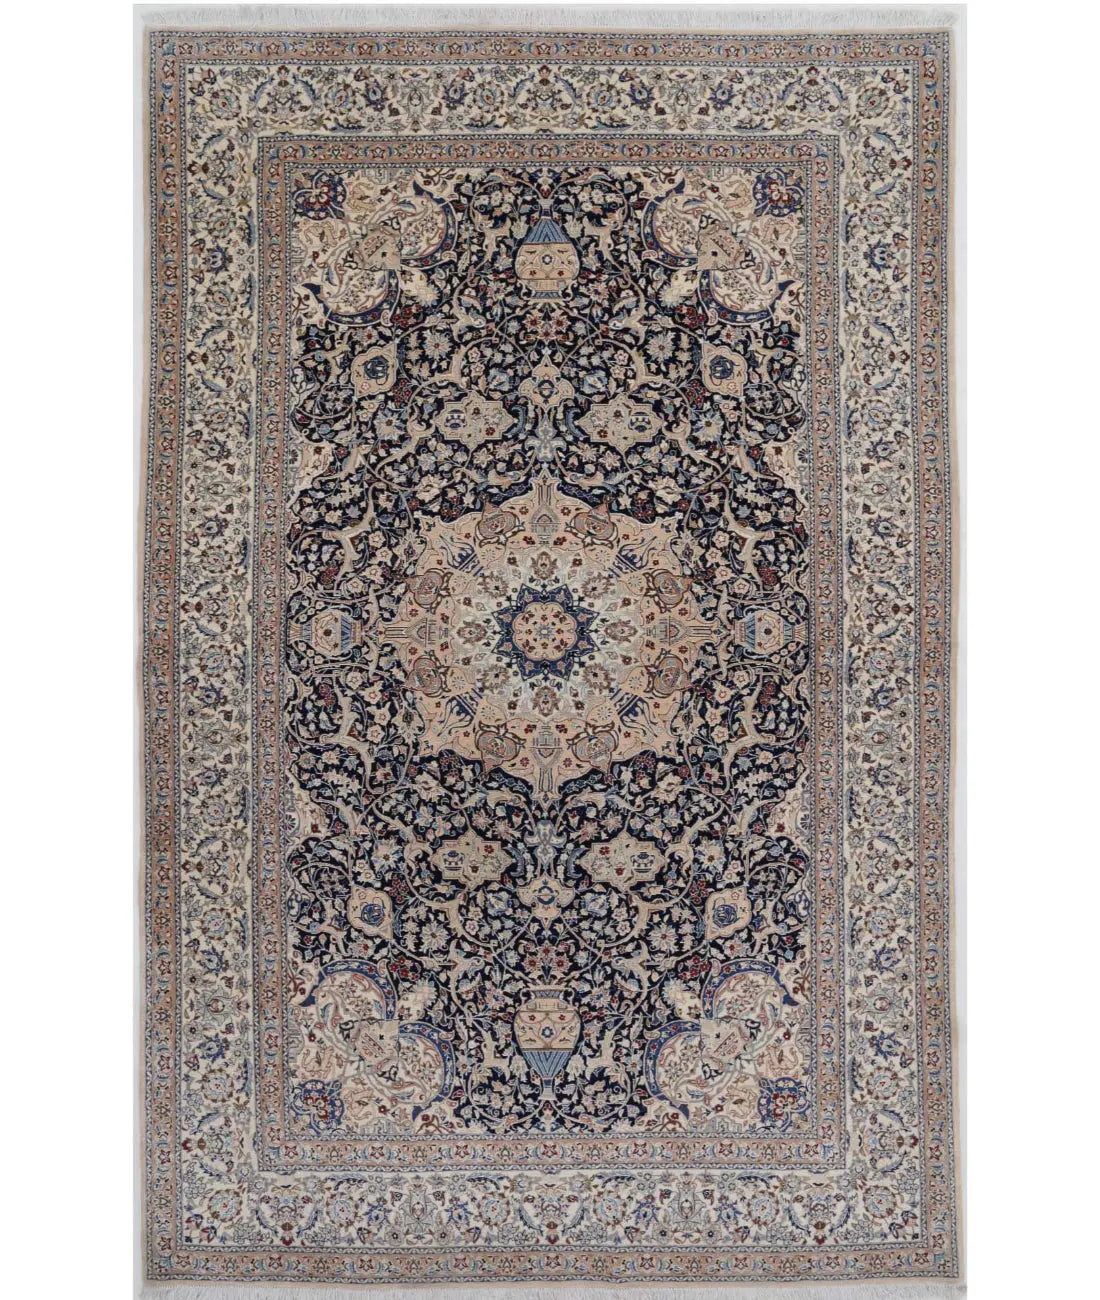 Hand Knotted Masterpiece Persian Nain Wool Rug - 5&#39;9&#39;&#39; x 9&#39;1&#39;&#39; - Arteverk Rugs Area rug